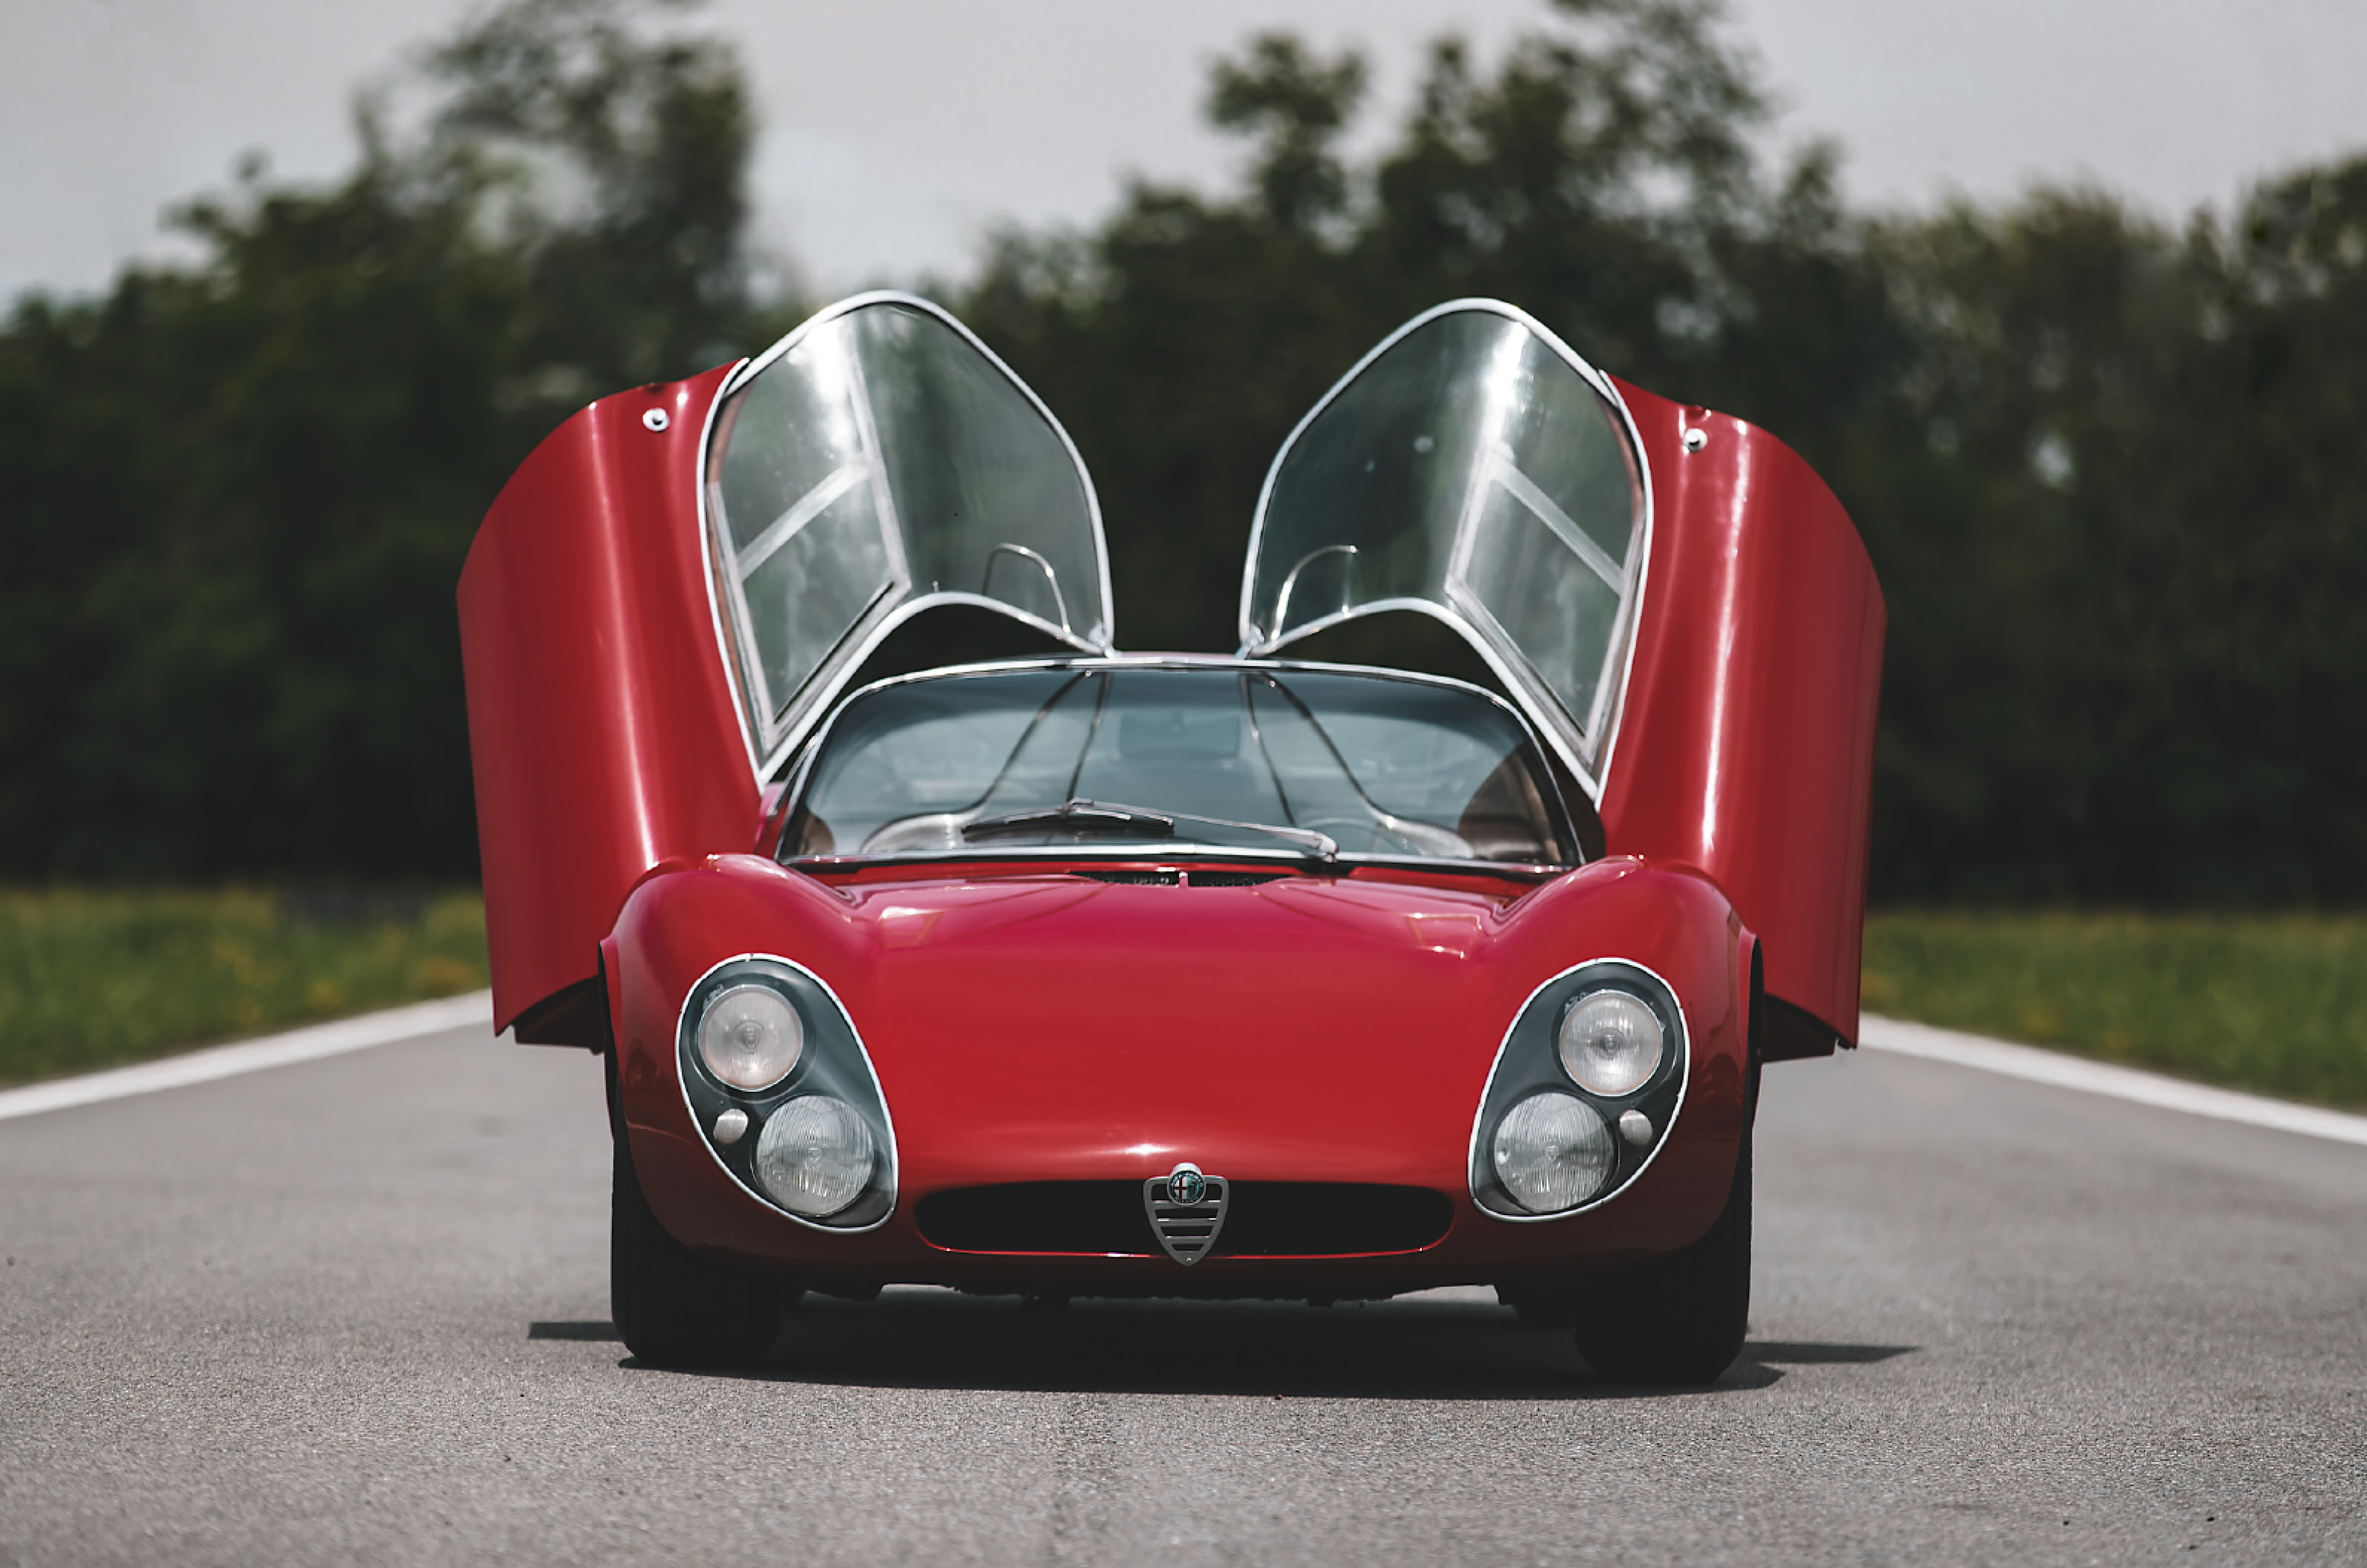 <p>What originally began as the Tipo 33 race car, morphed into a roadgoing 33 Stradale version. Over a two-year production run, just 18 left the Alfa Romeo factory.</p>  <p>At the time it was one of the fastest and most expensive road-legal supercars. It was constructed with an aluminum body and weighed just 700KG (about 1540LB).</p>  <p>Most notably, the Alfa Romeo 33 Stradale is remembered for its oval-shaped headlights and roof-hinged butterfly doors, with window panels that wrapped around to the roof.</p>  <p>When the doors are closed it creates a split-sunroof illusion and an uninterrupted view.</p>  <p>Doors open or closed, the 33 Stradale is praised as a particularly stunning example of Italian automotive design, inspired by Alfa Romeo’s racing heritage.</p>